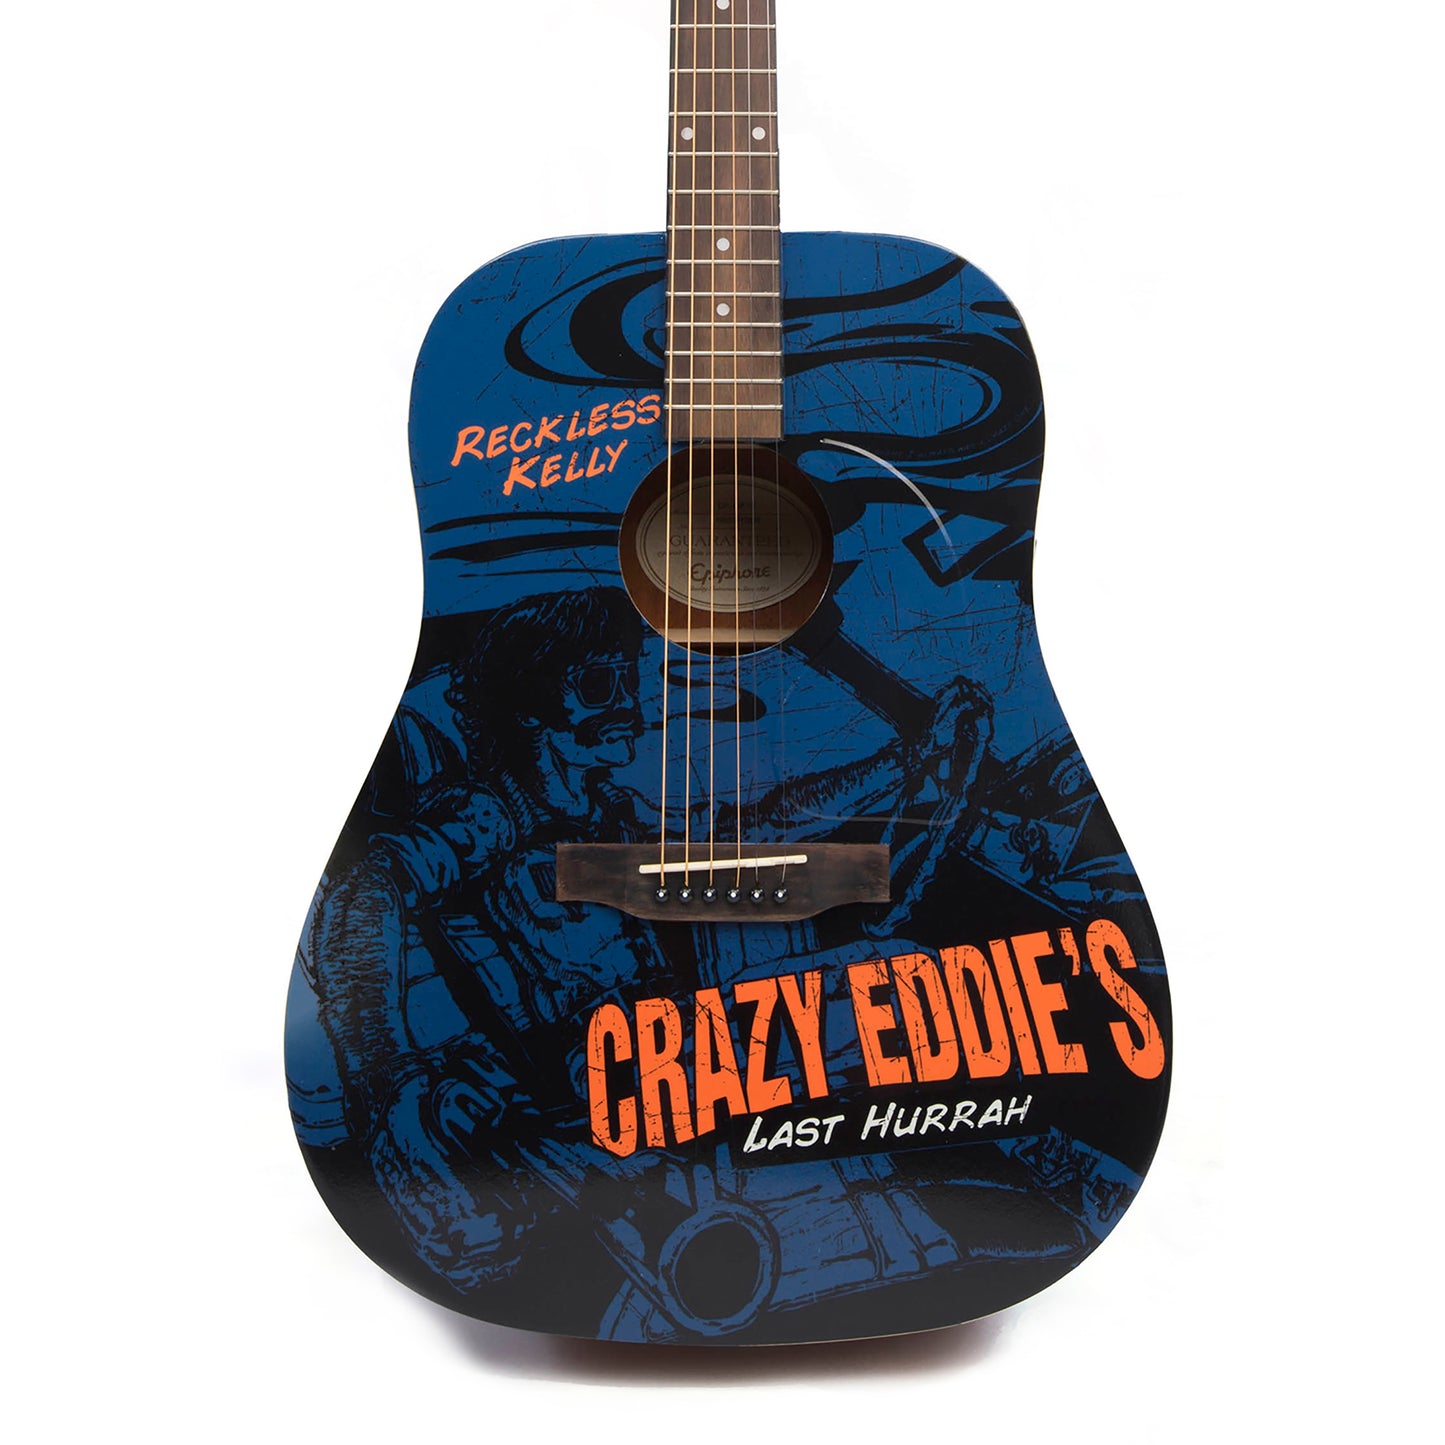 Crazy Eddie's Last Hurrah Guitar - AUTOGRAPHED BY RECKLESS KELLY